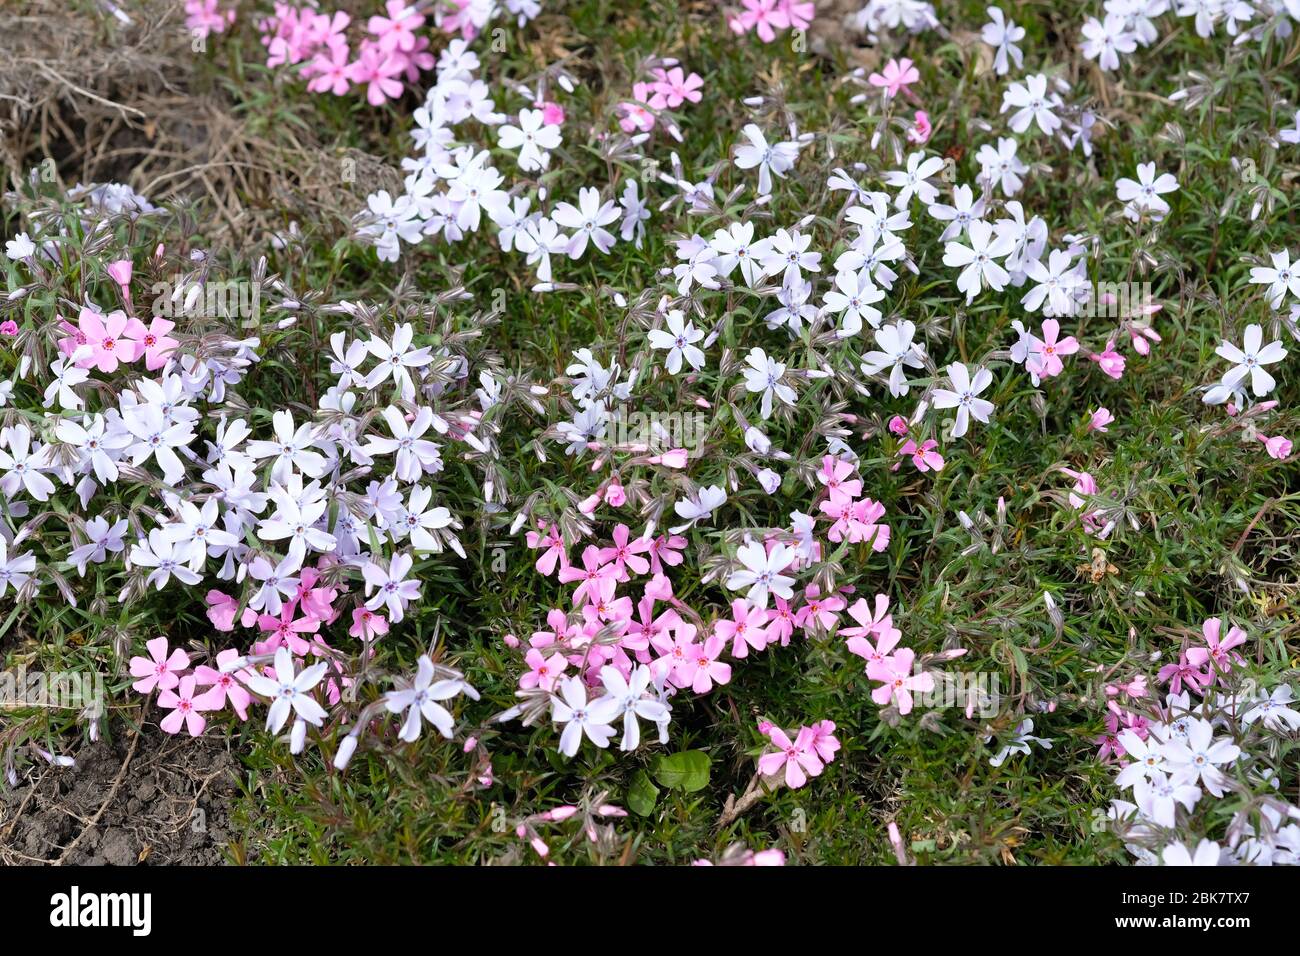 Phlox ground cover on a flower bed. Small pink flowers for decoration puffs in the garden. Flowering Phlox subulata bushes close-up. Stock Photo